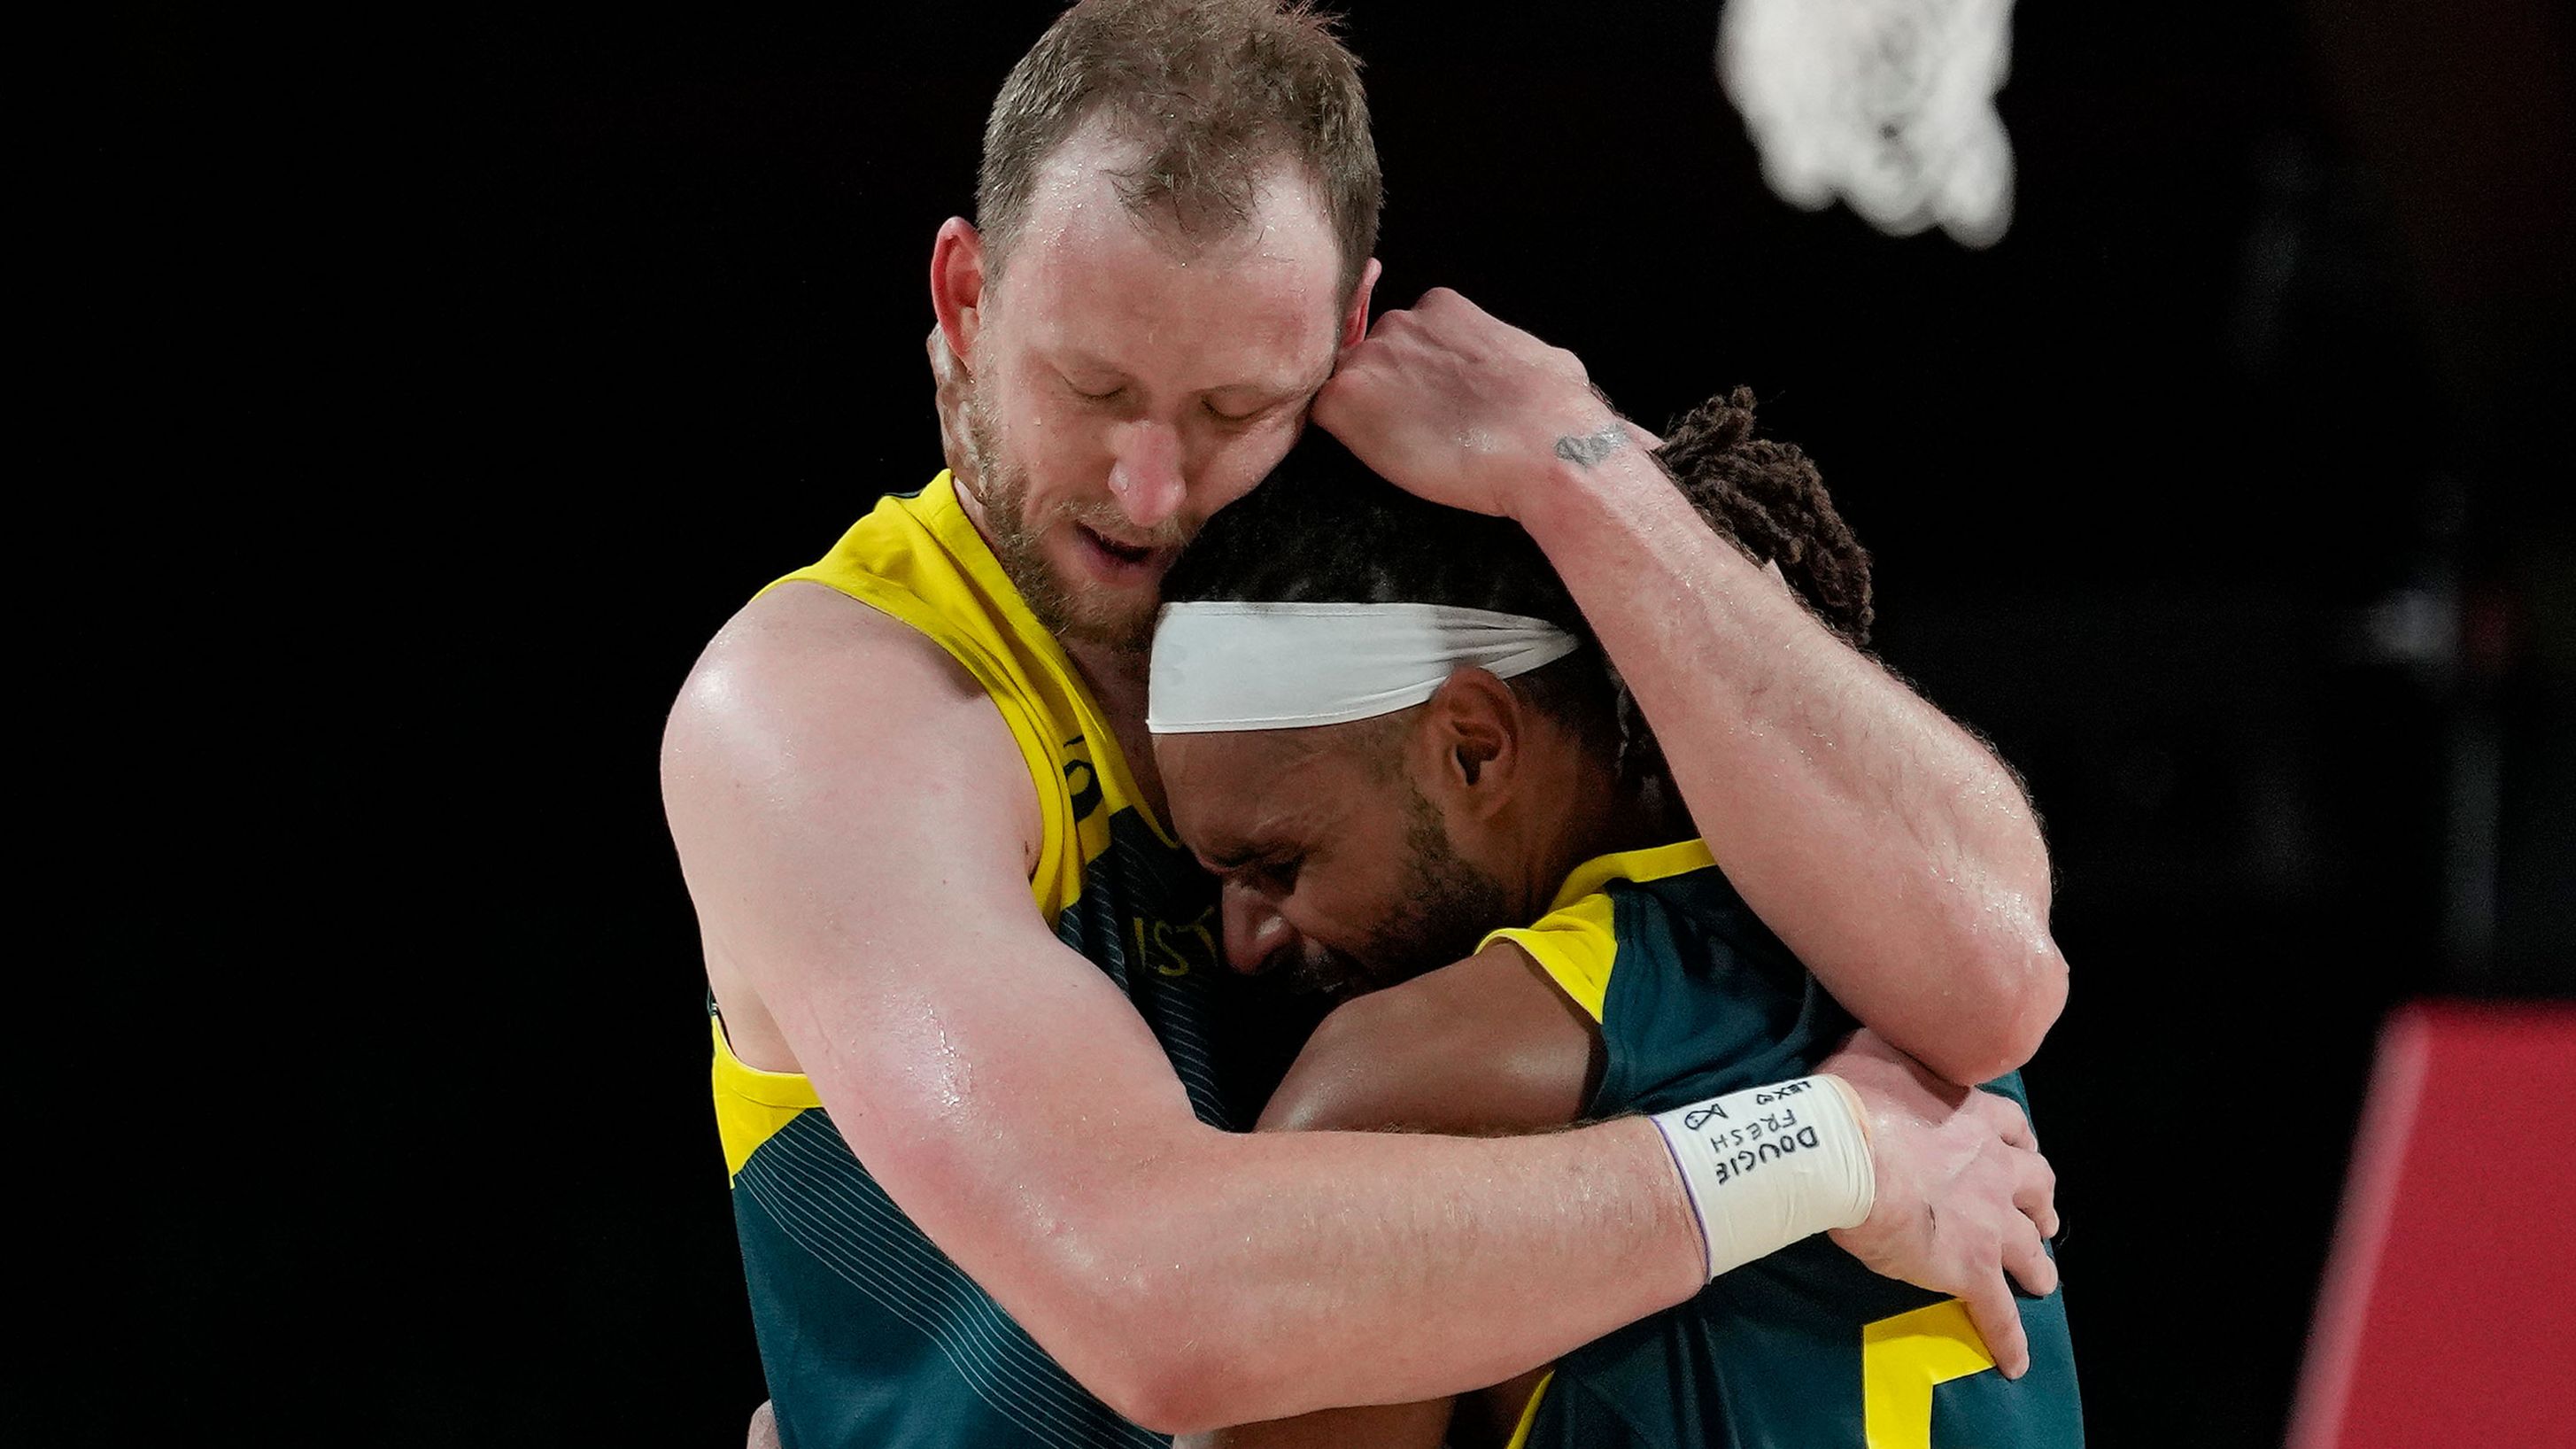 Aussie basketball favourite Joe Ingles traded by NBA team one week after serious injury